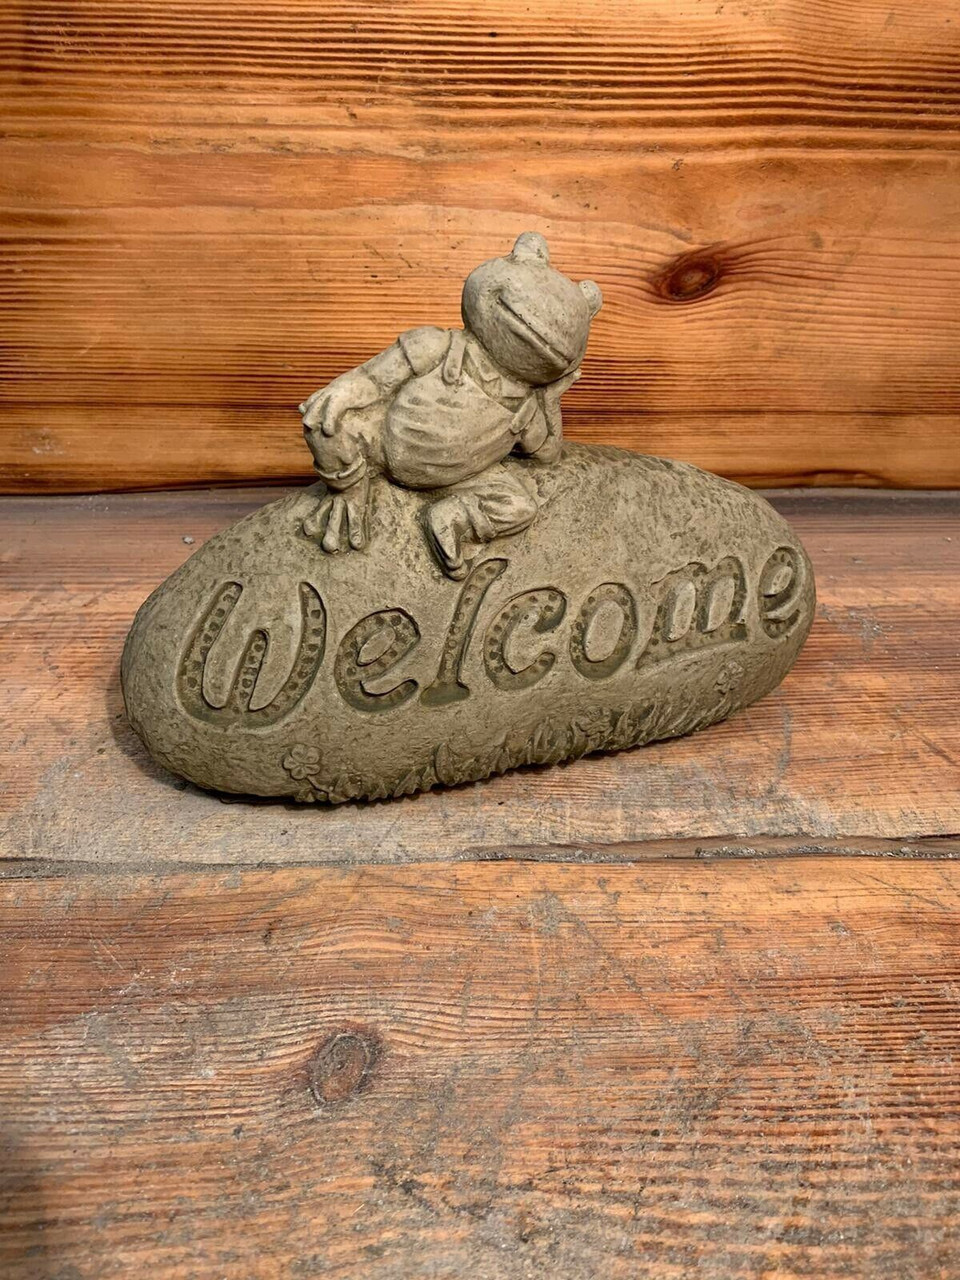 STONE GARDEN WELCOME FROG TOAD ON ROCK STATUE ORNAMENT